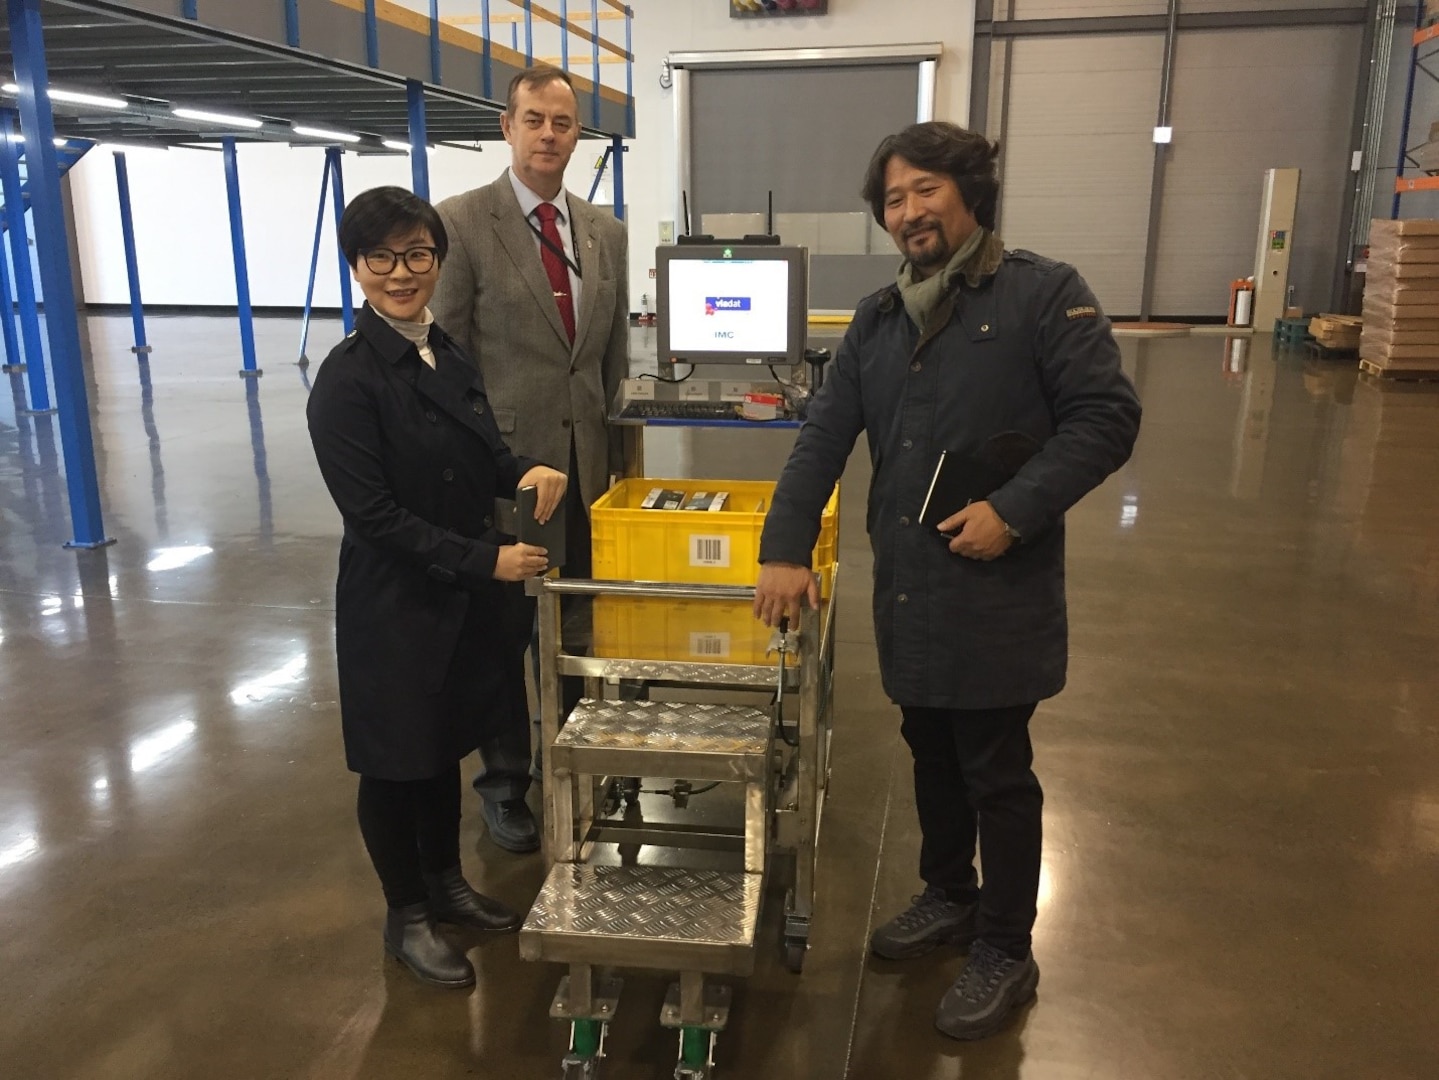 O, Hyon Yong, Dave Harris, and Kim, Yong Ki examining the Taegu Tec mobile cart. The cart is light weight, easily manuverable, has an inexpensive power supply and a built-in step ladder to work in the under mezzine walk and pick area.